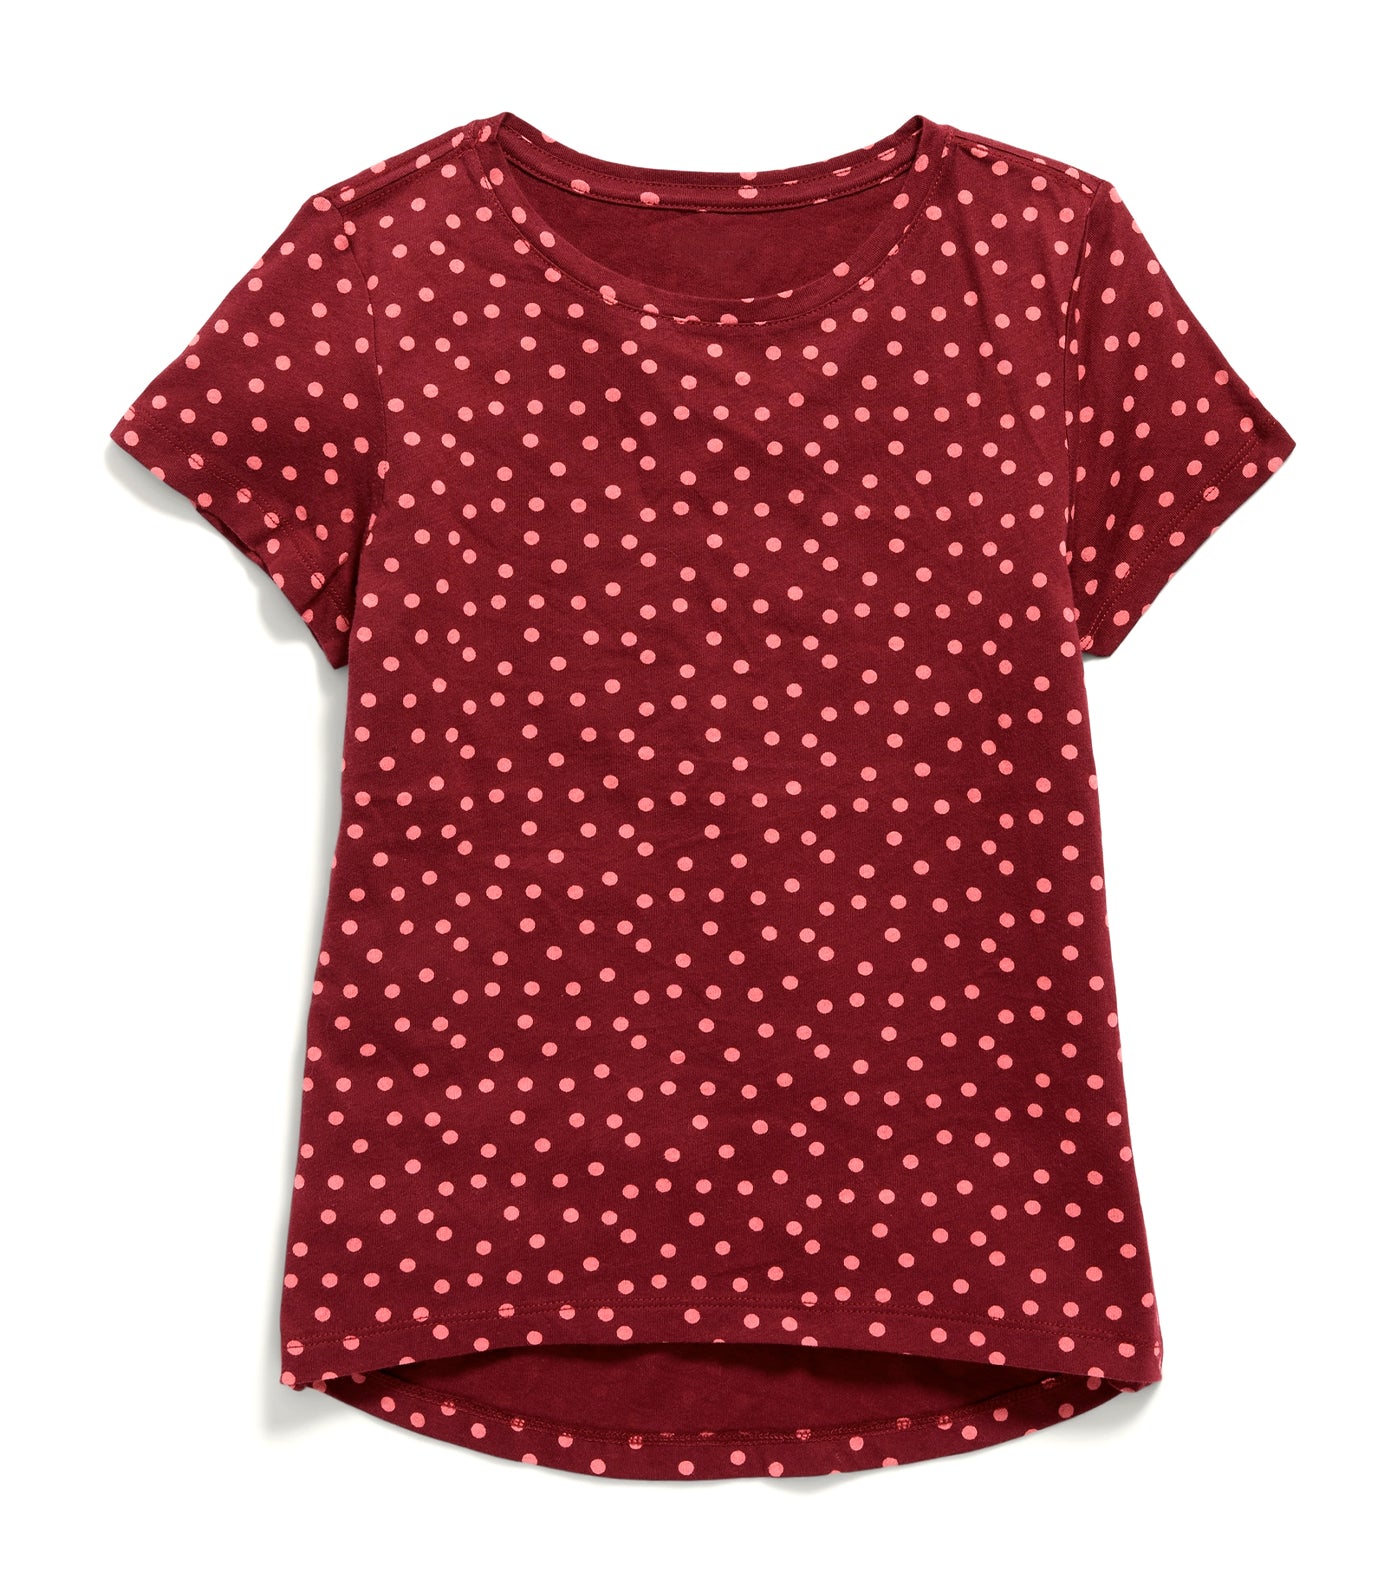 Softest Printed T-Shirt for Girls - Wine Stain